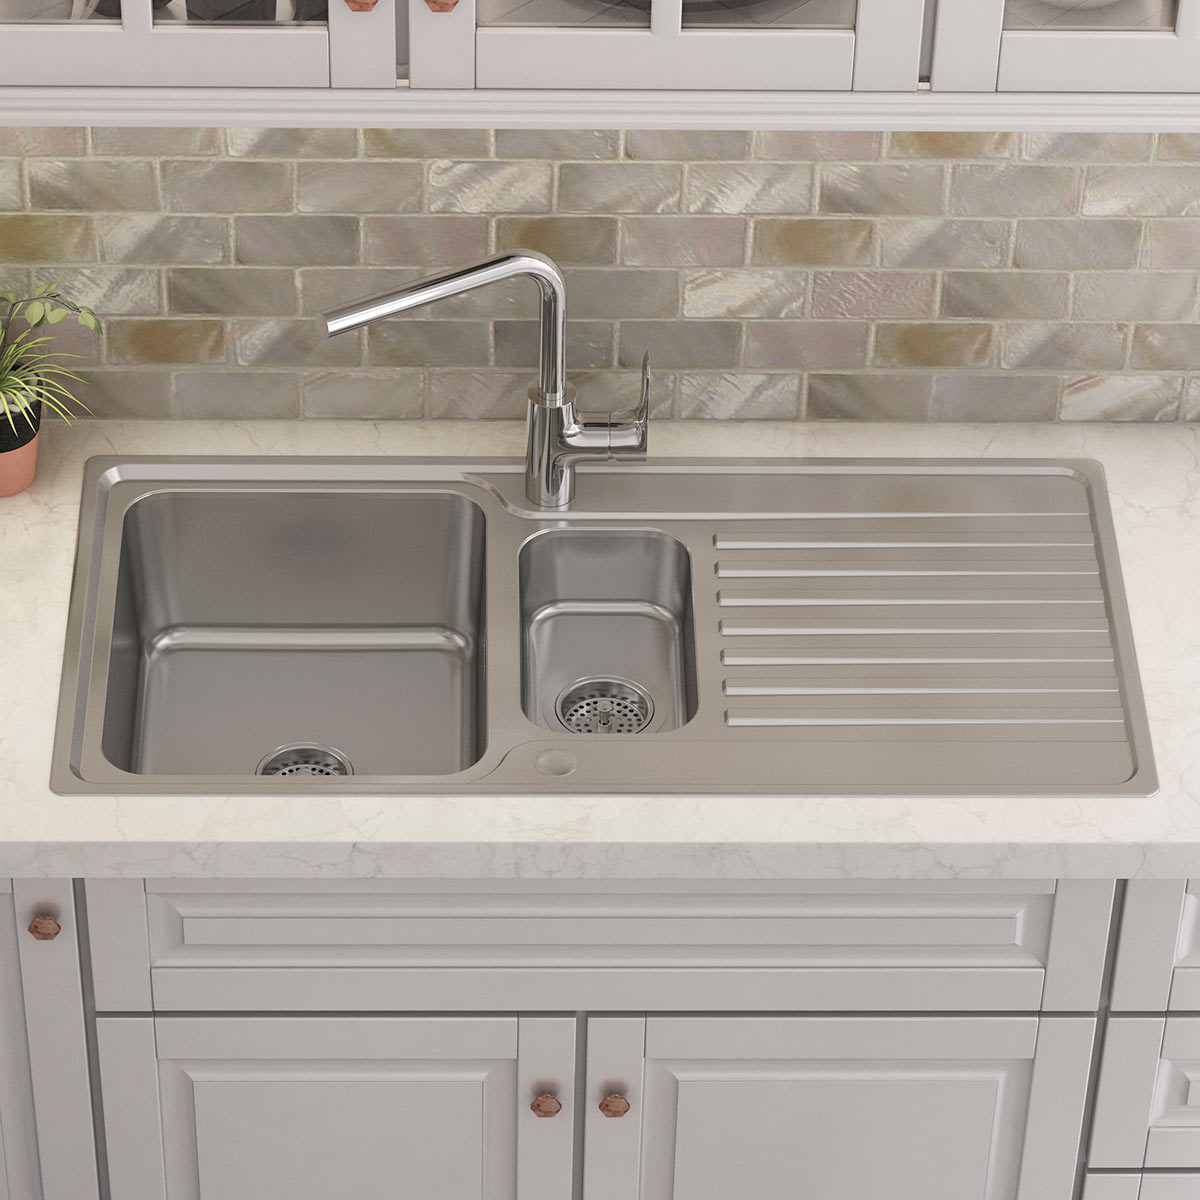 Kohler Hone Stainless Steel Sink With Draining Board And Aleo Single Lever Mixer Tap Bundle Model C20669 Na Costco Uk